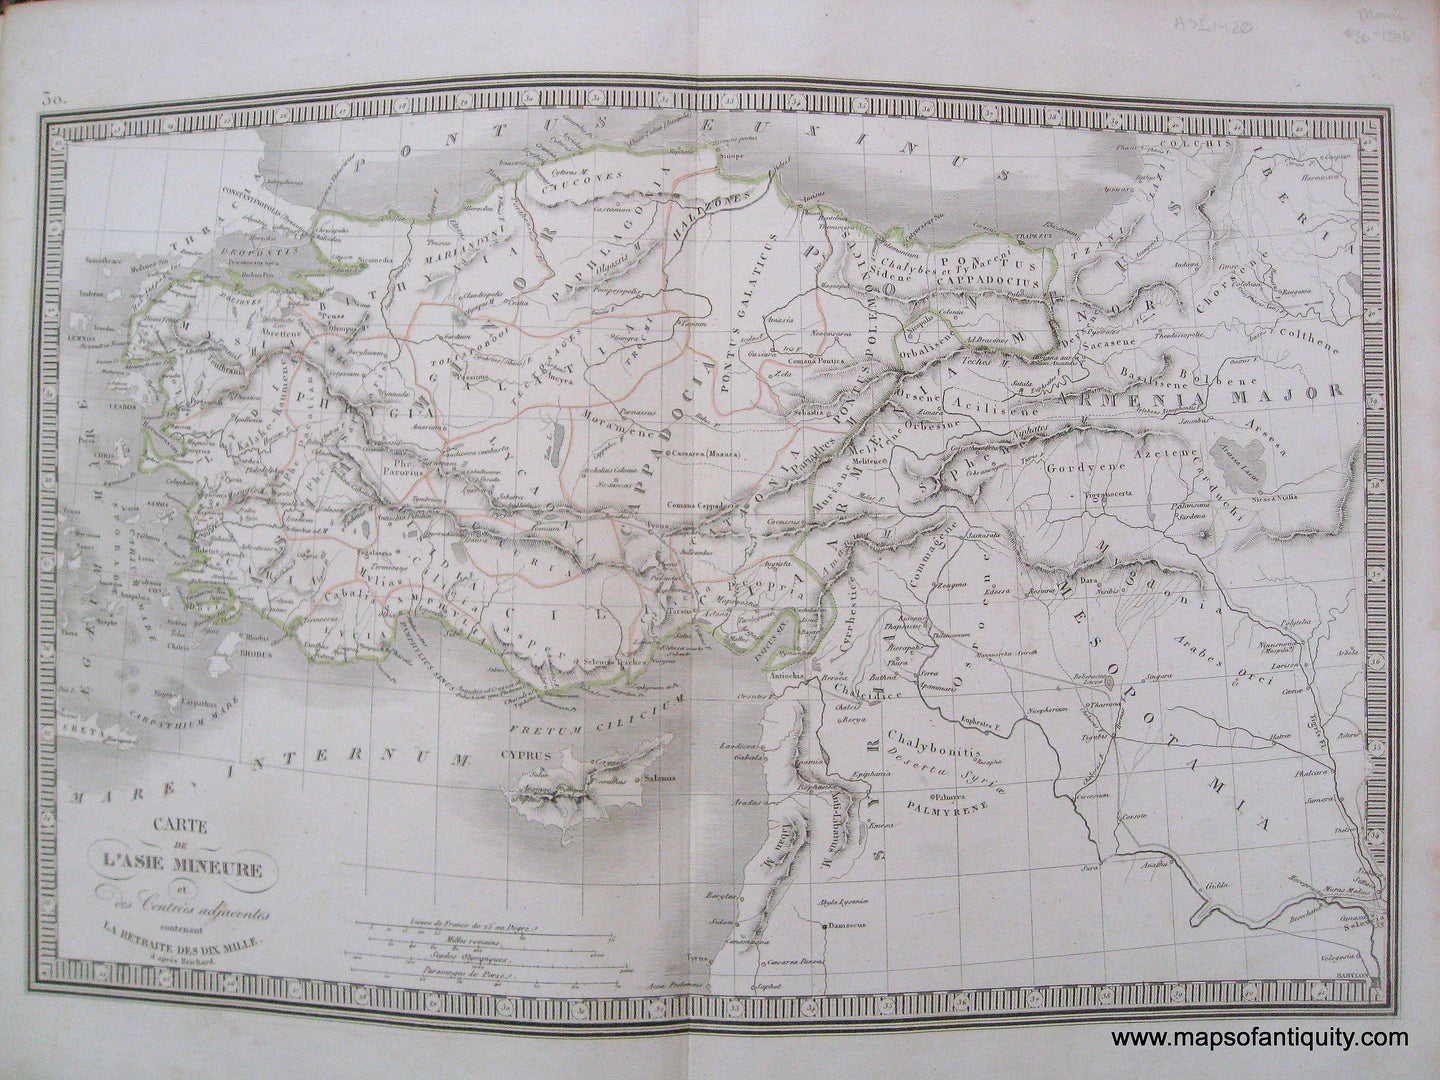 Antique-Hand-Colored-Map-Carte-de-L'Asie-Mineure-(Map-of-Asia-Minor)-1846-Monin-Asia-Minor-1800s-19th-century-Maps-of-Antiquity